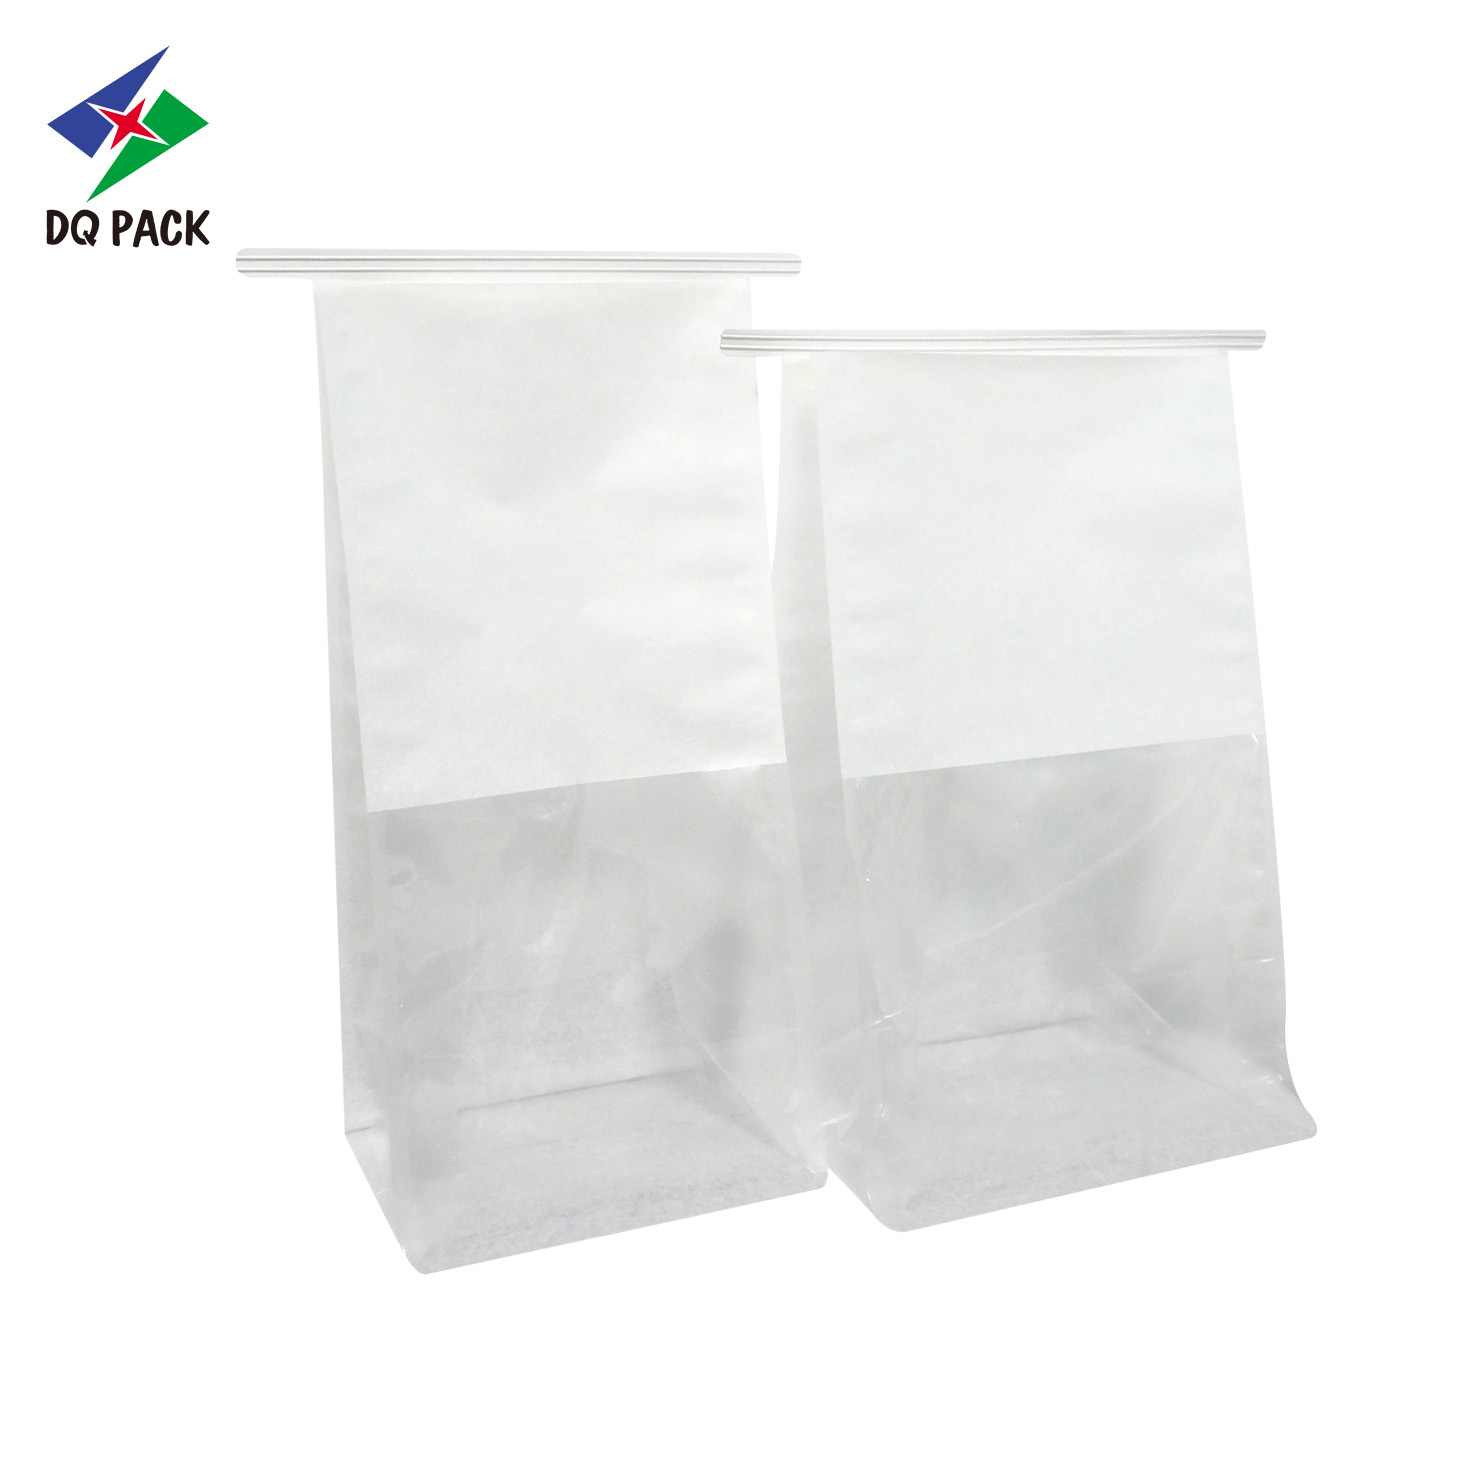 DQ PACK White Kraft Paper Bag Bread Plastic Packaging With Window Featured Image